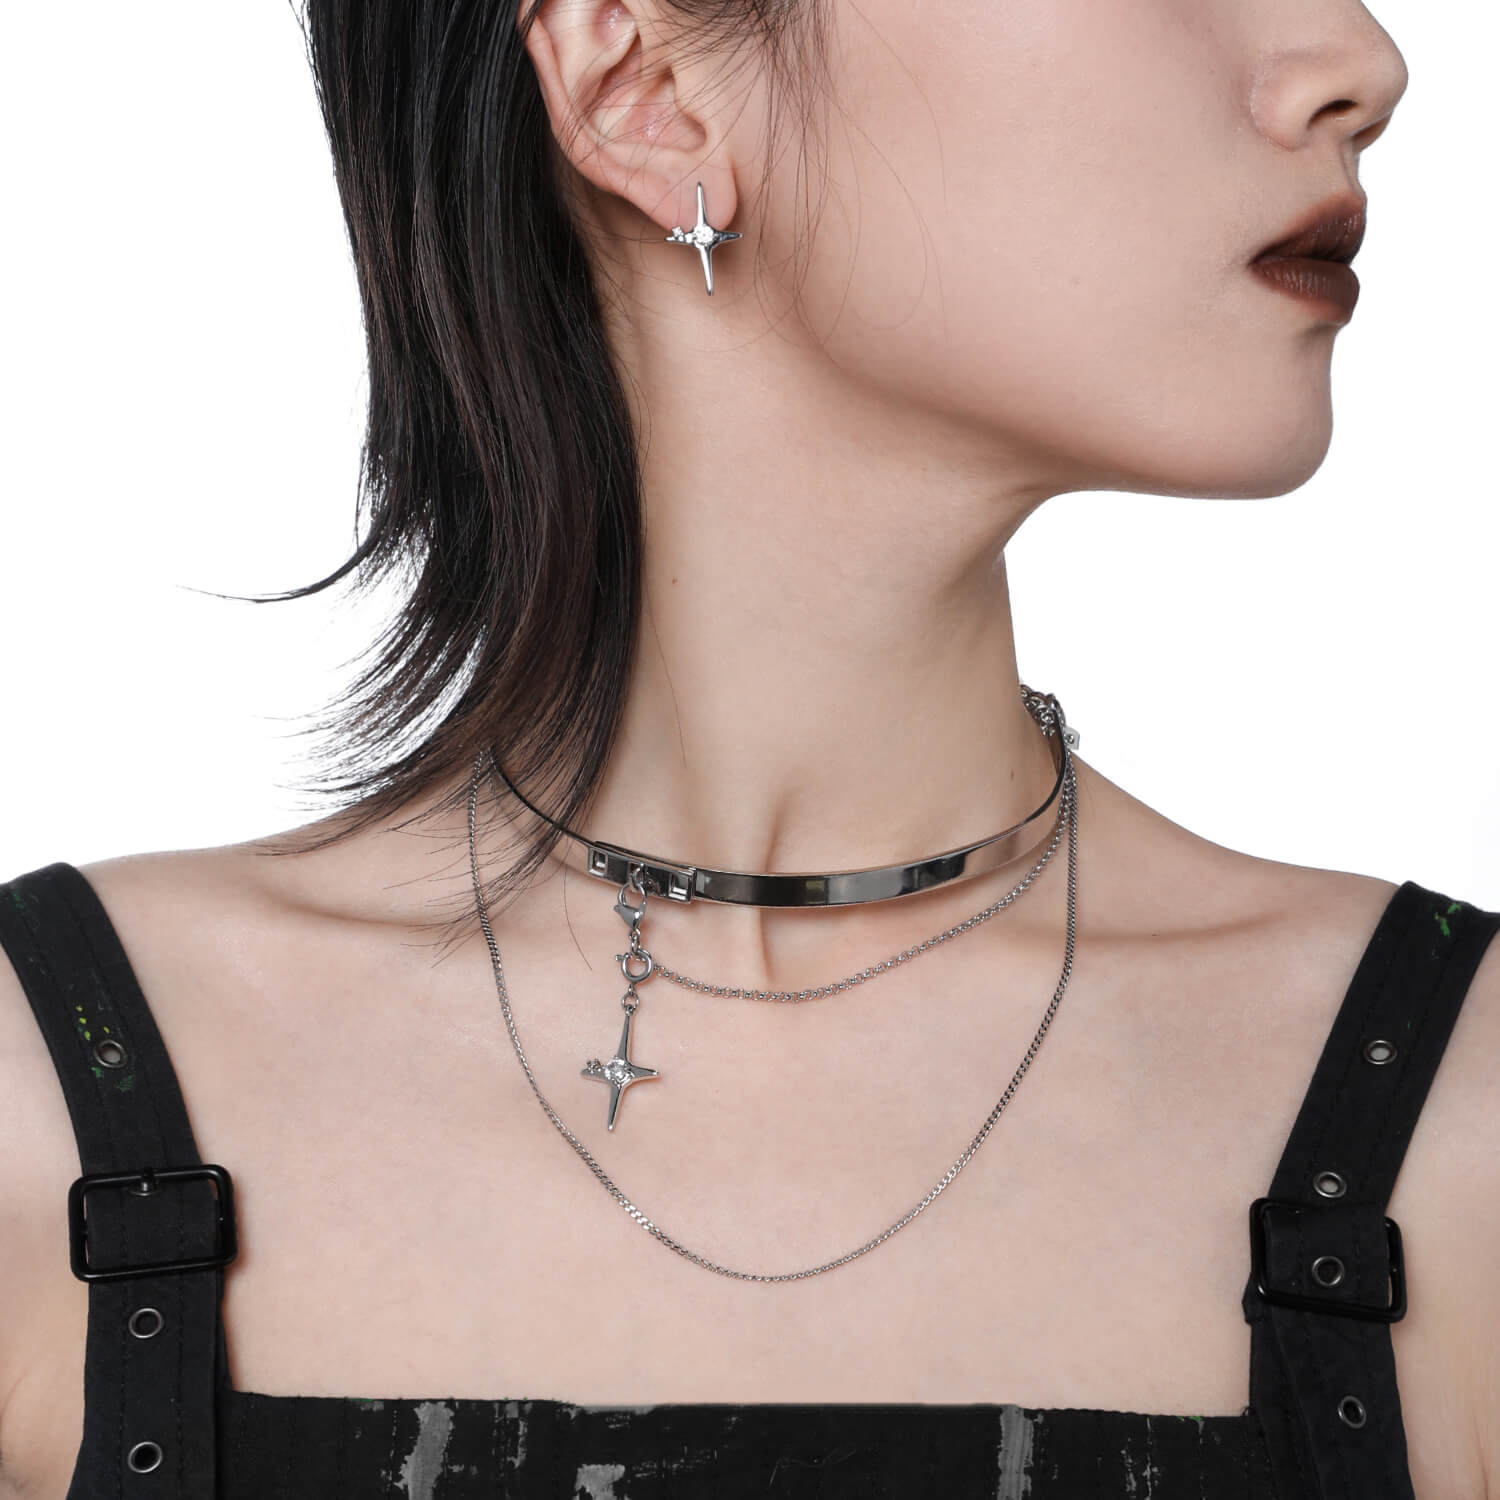 Detachable Necklace y2k Clavicle Chain | Buy at Khanie